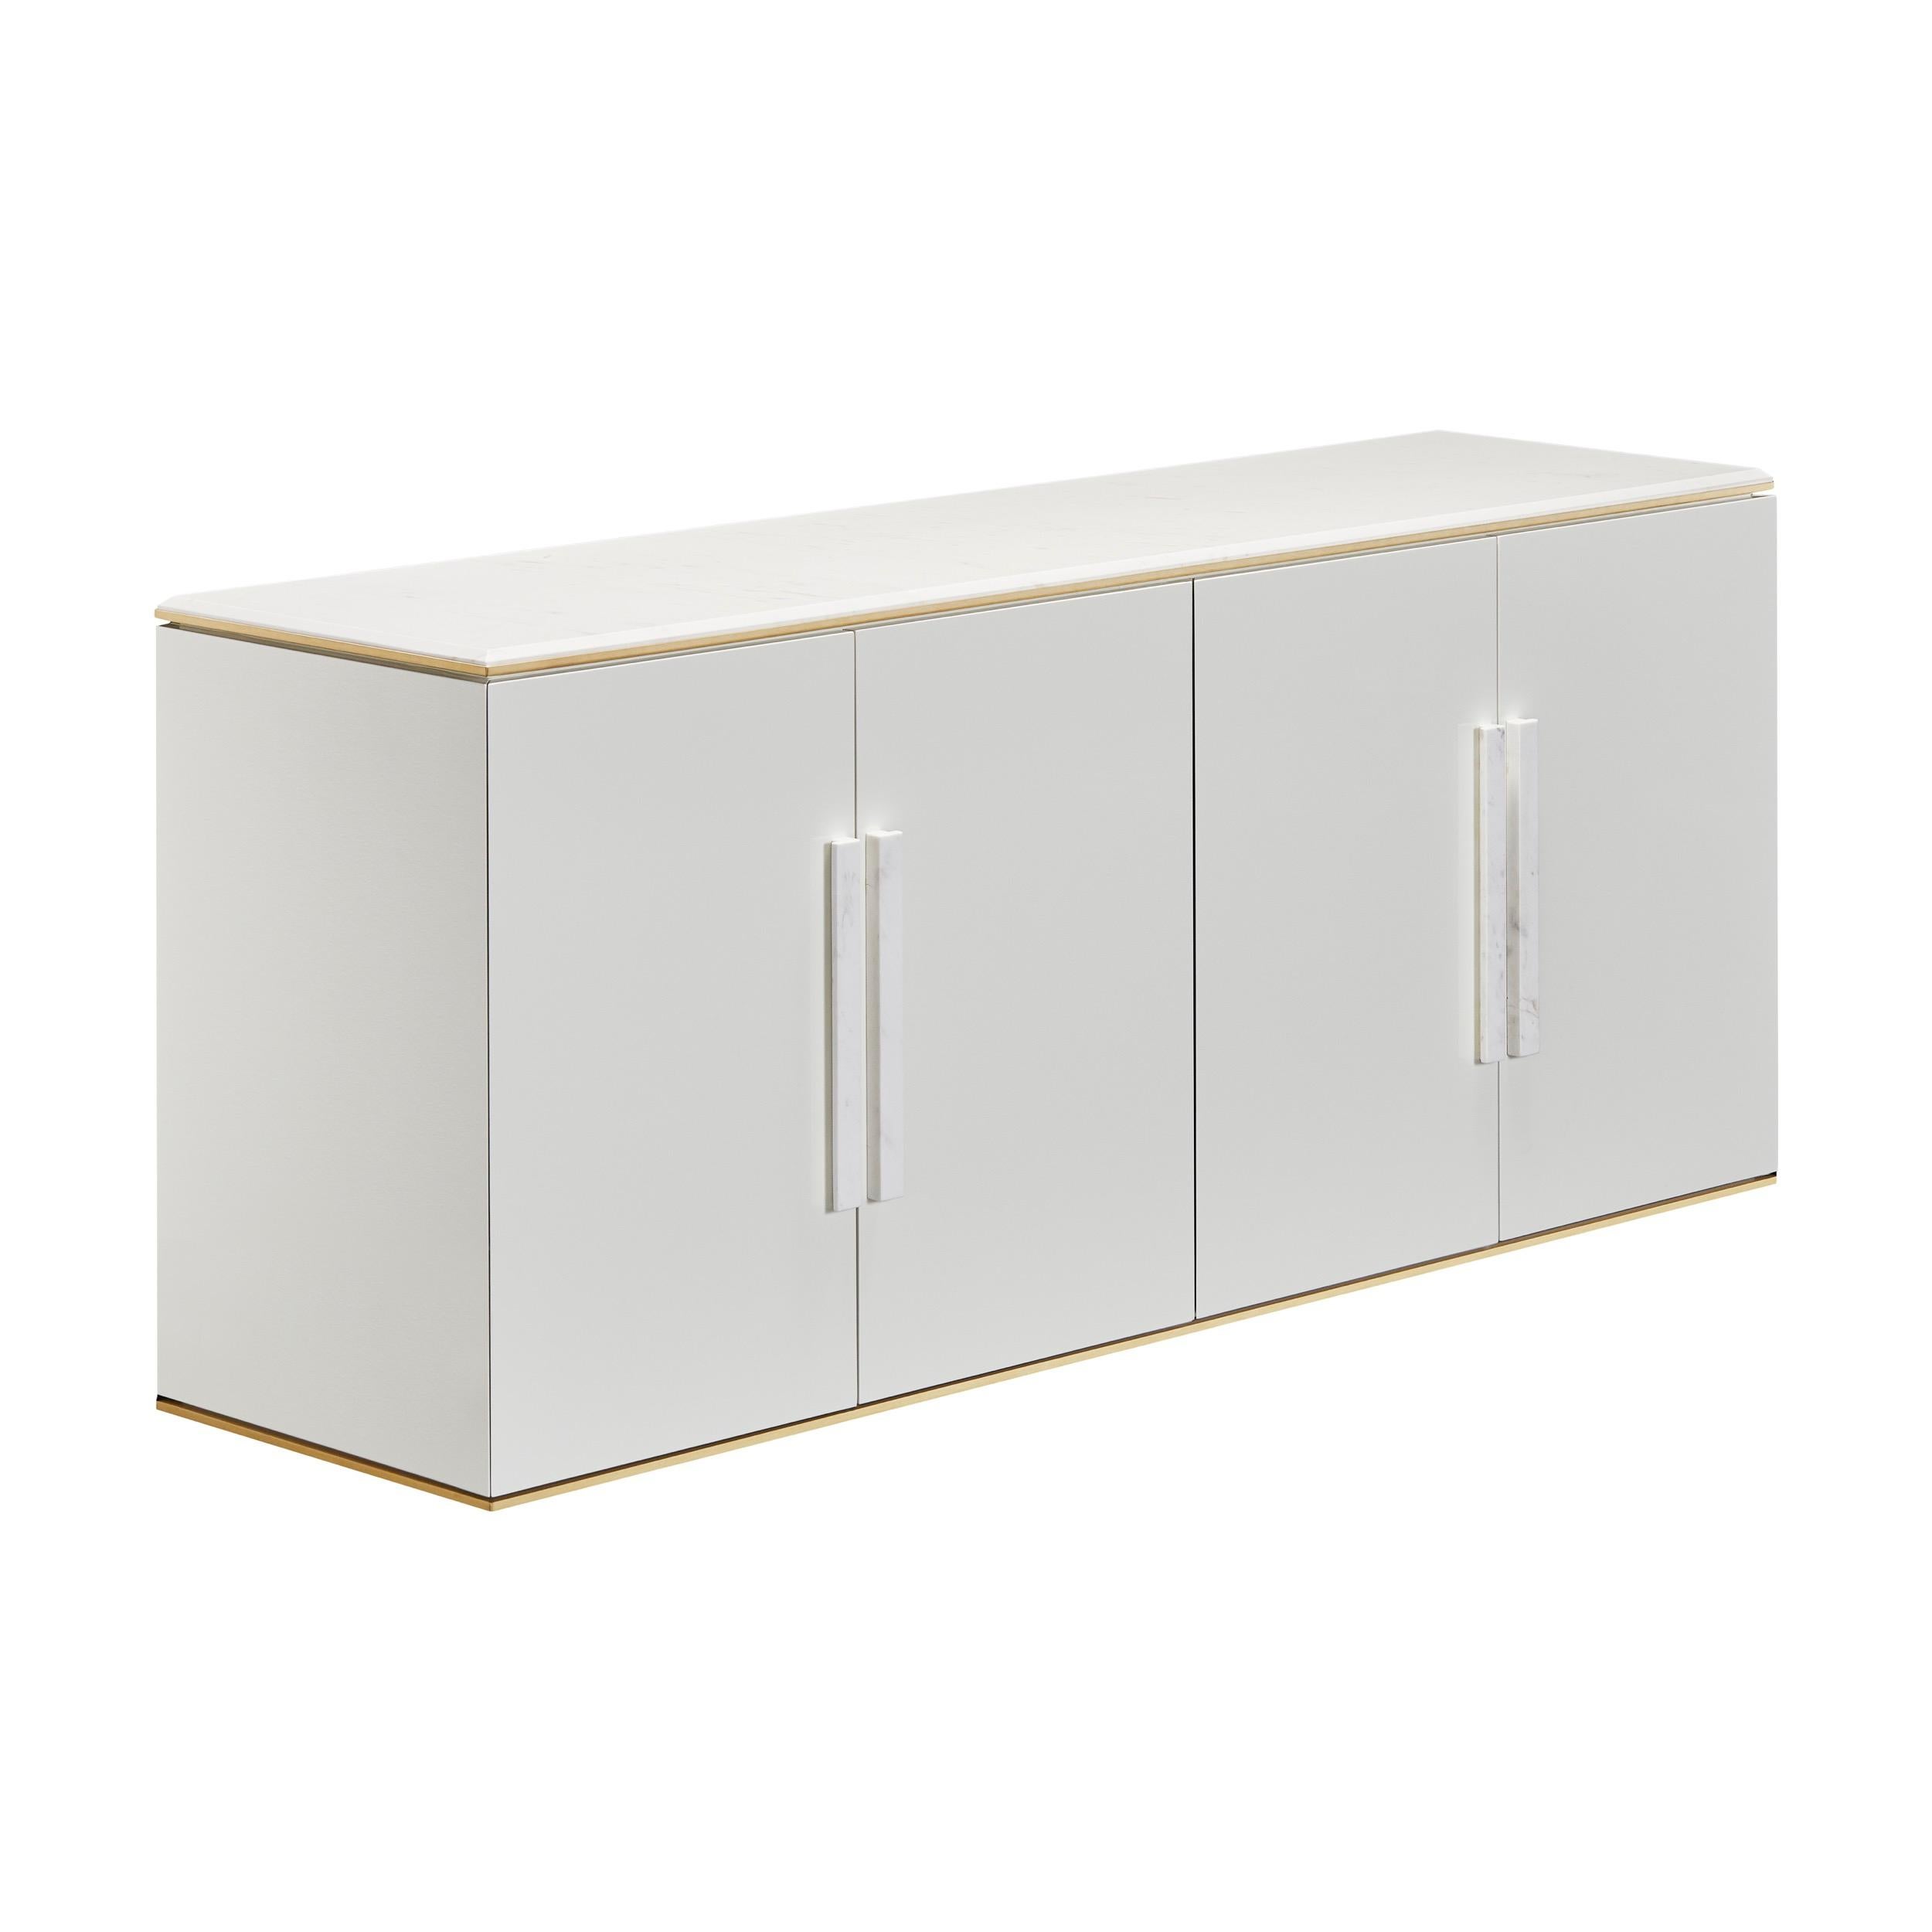 Modern Infante II sideboard with Olympic White marble top and handles